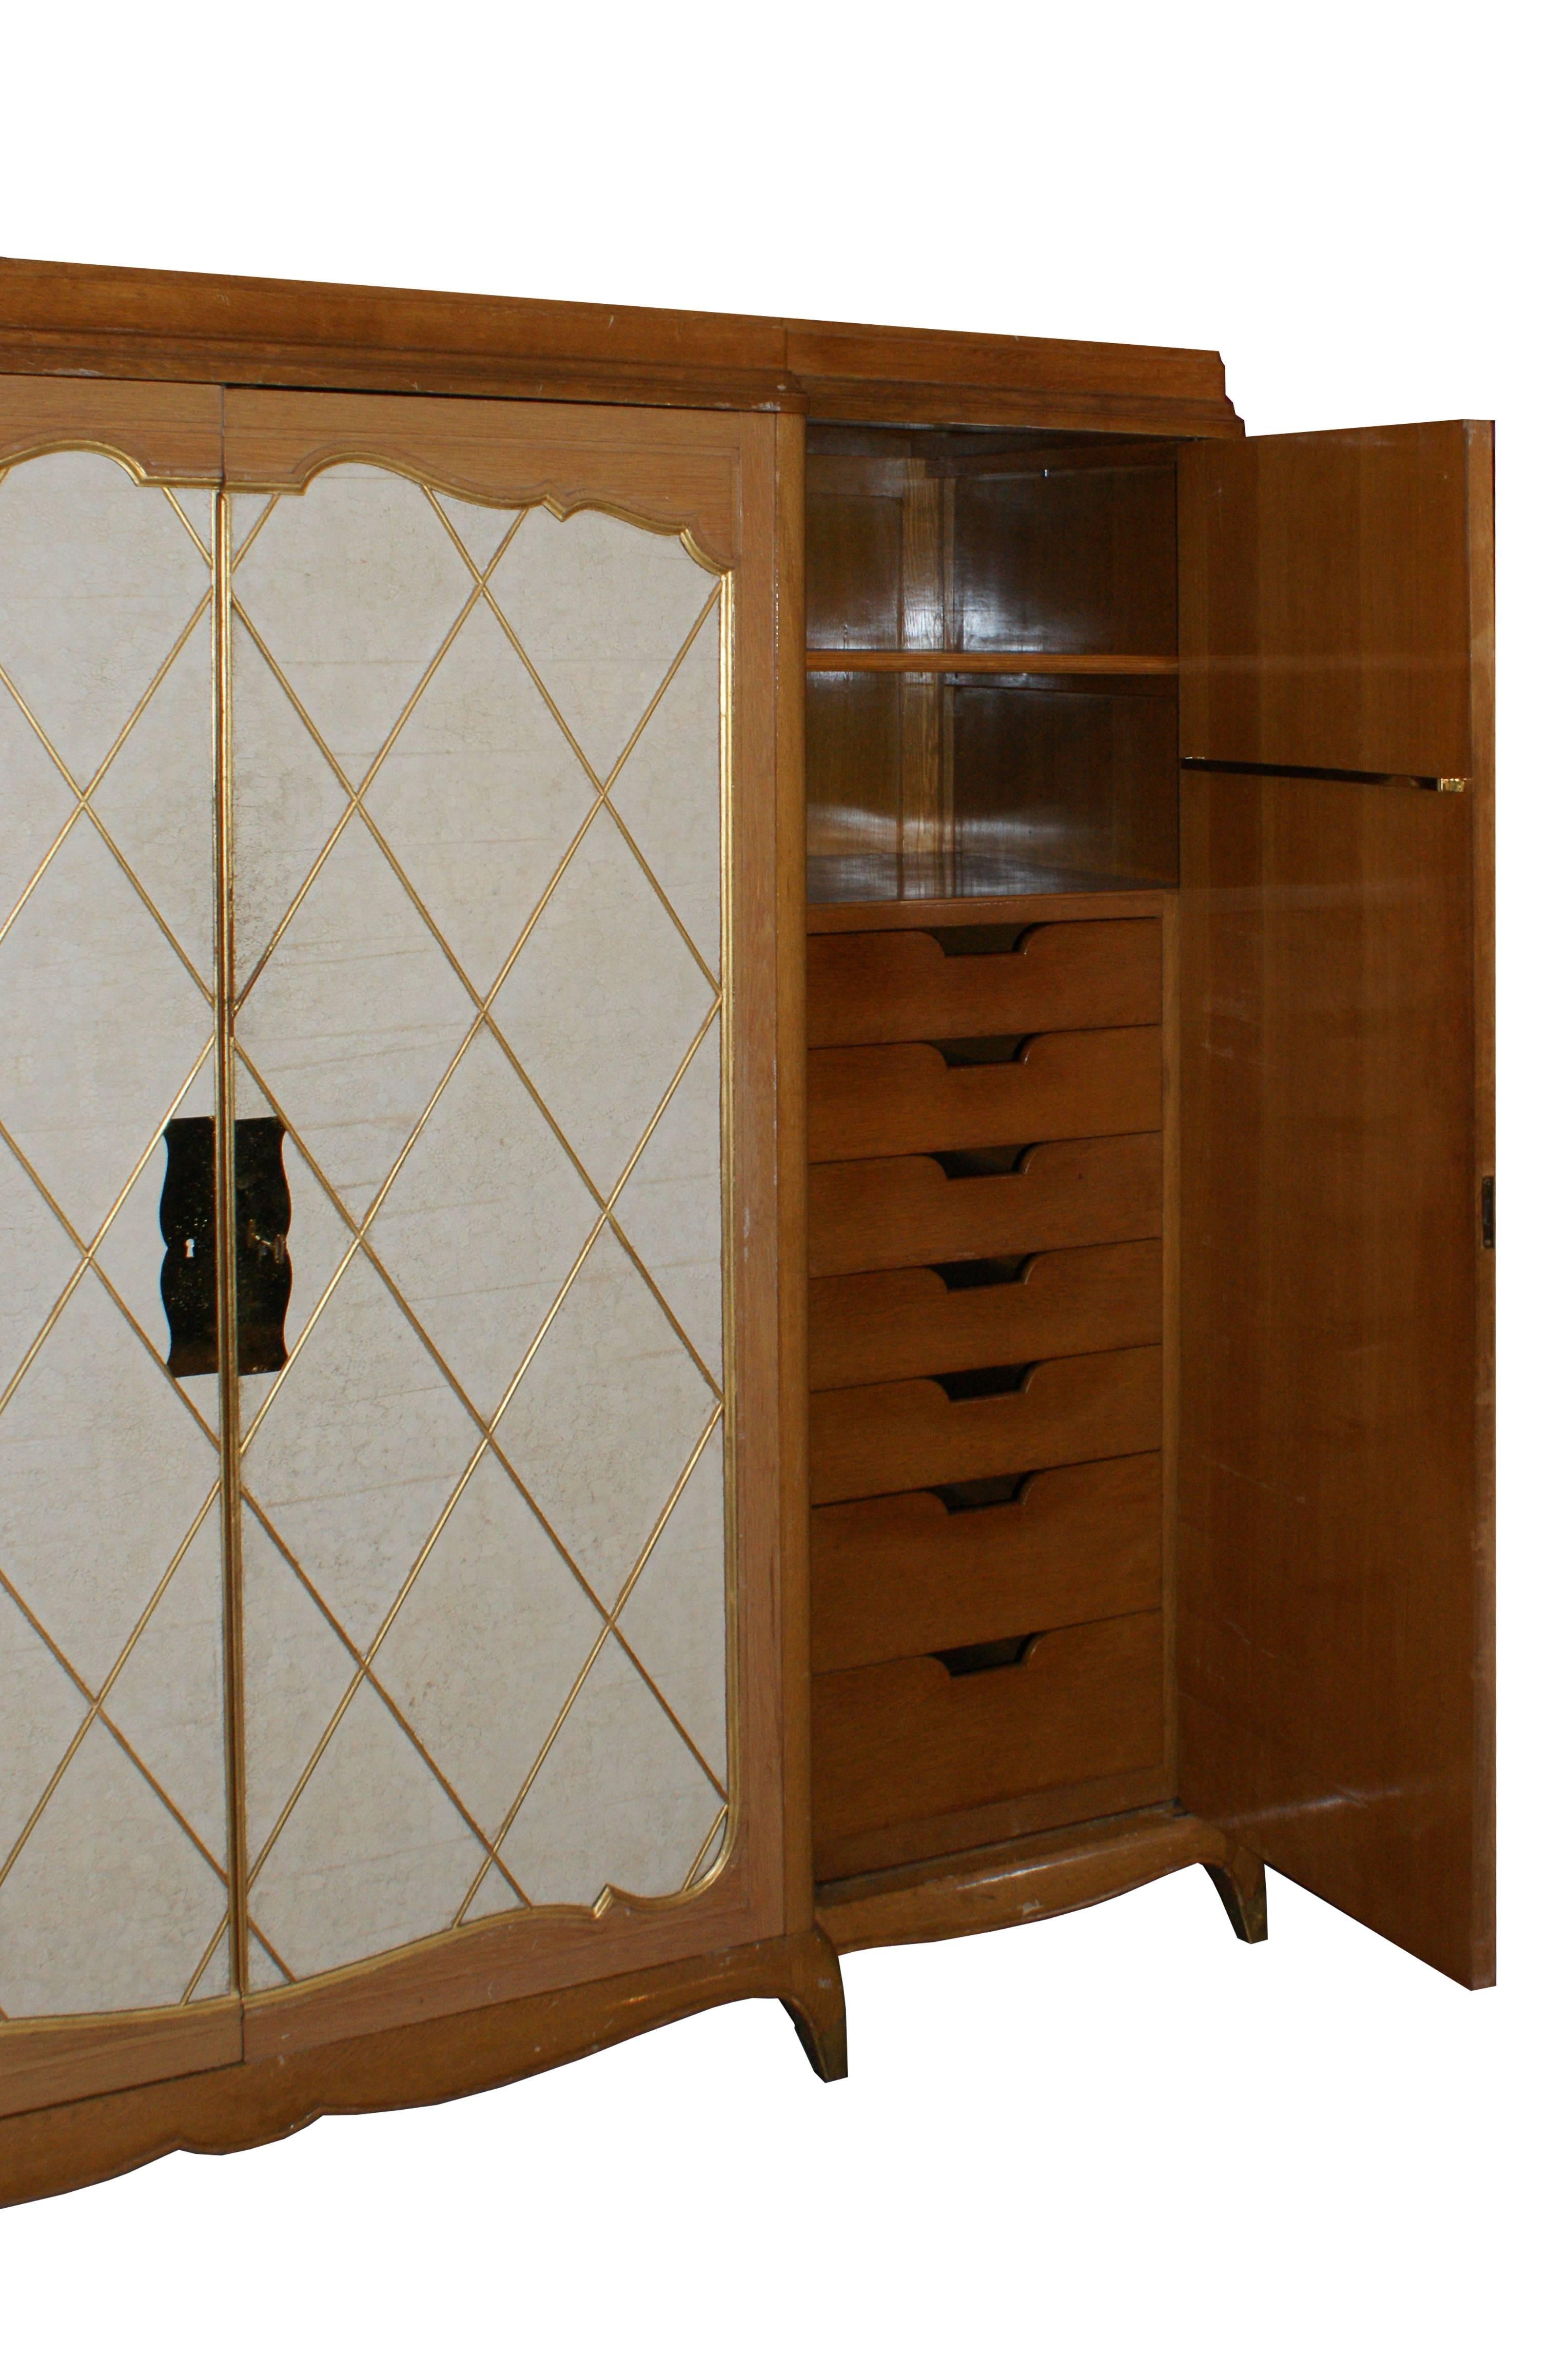 Art Deco Andrè Arbus, 1940s Wardrobe in Cherrywood and Eggshell, France For Sale